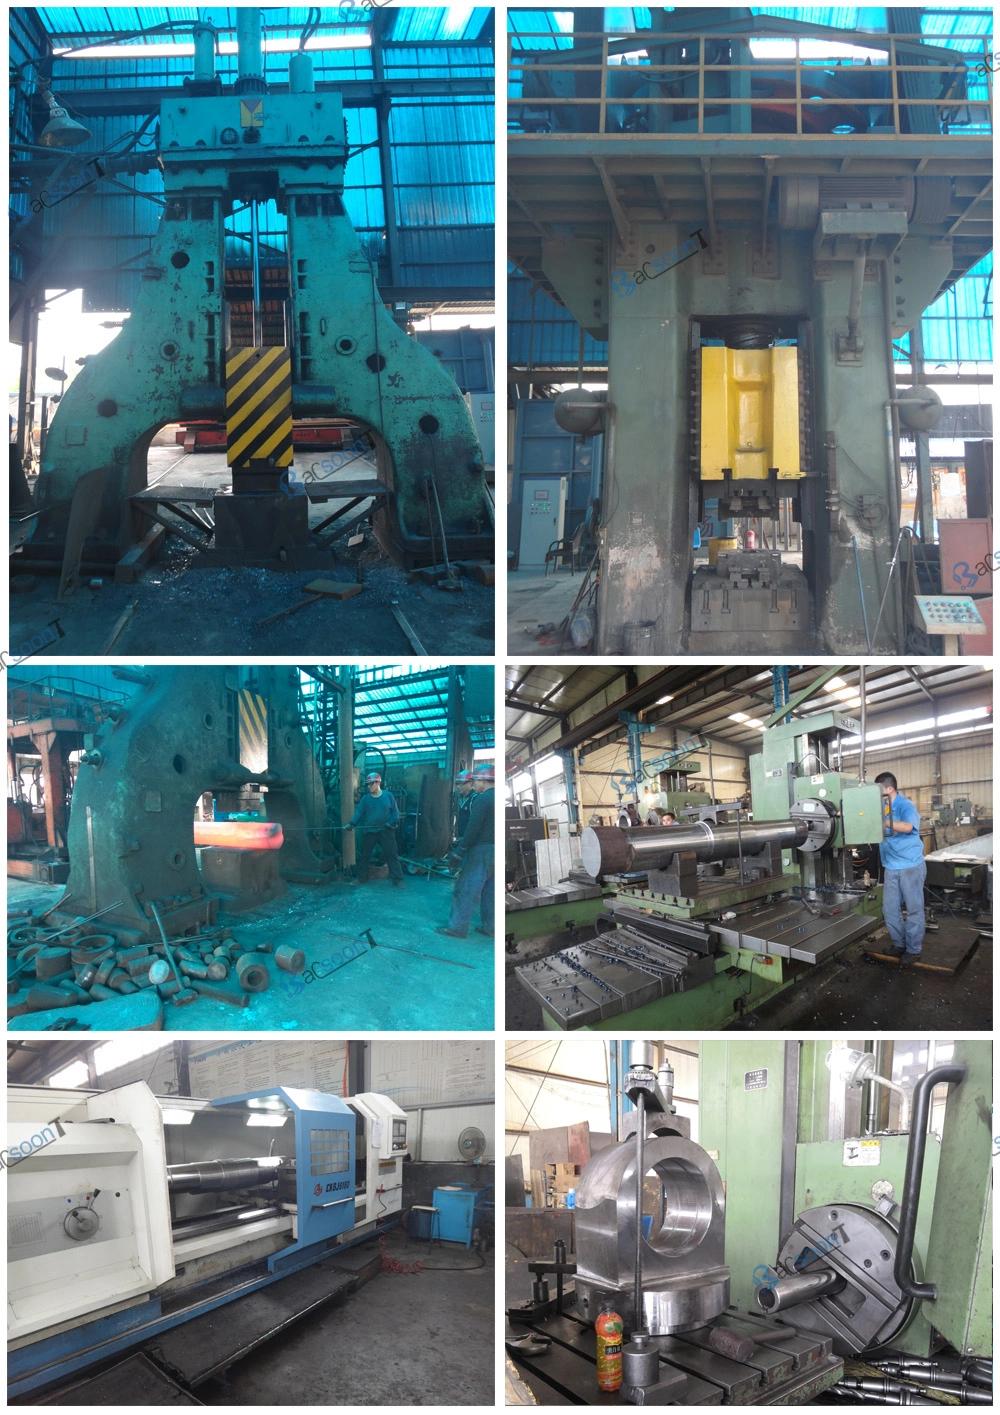 4340/4140/Steel Forged Shaft with Machining According to Customer′s Drawing